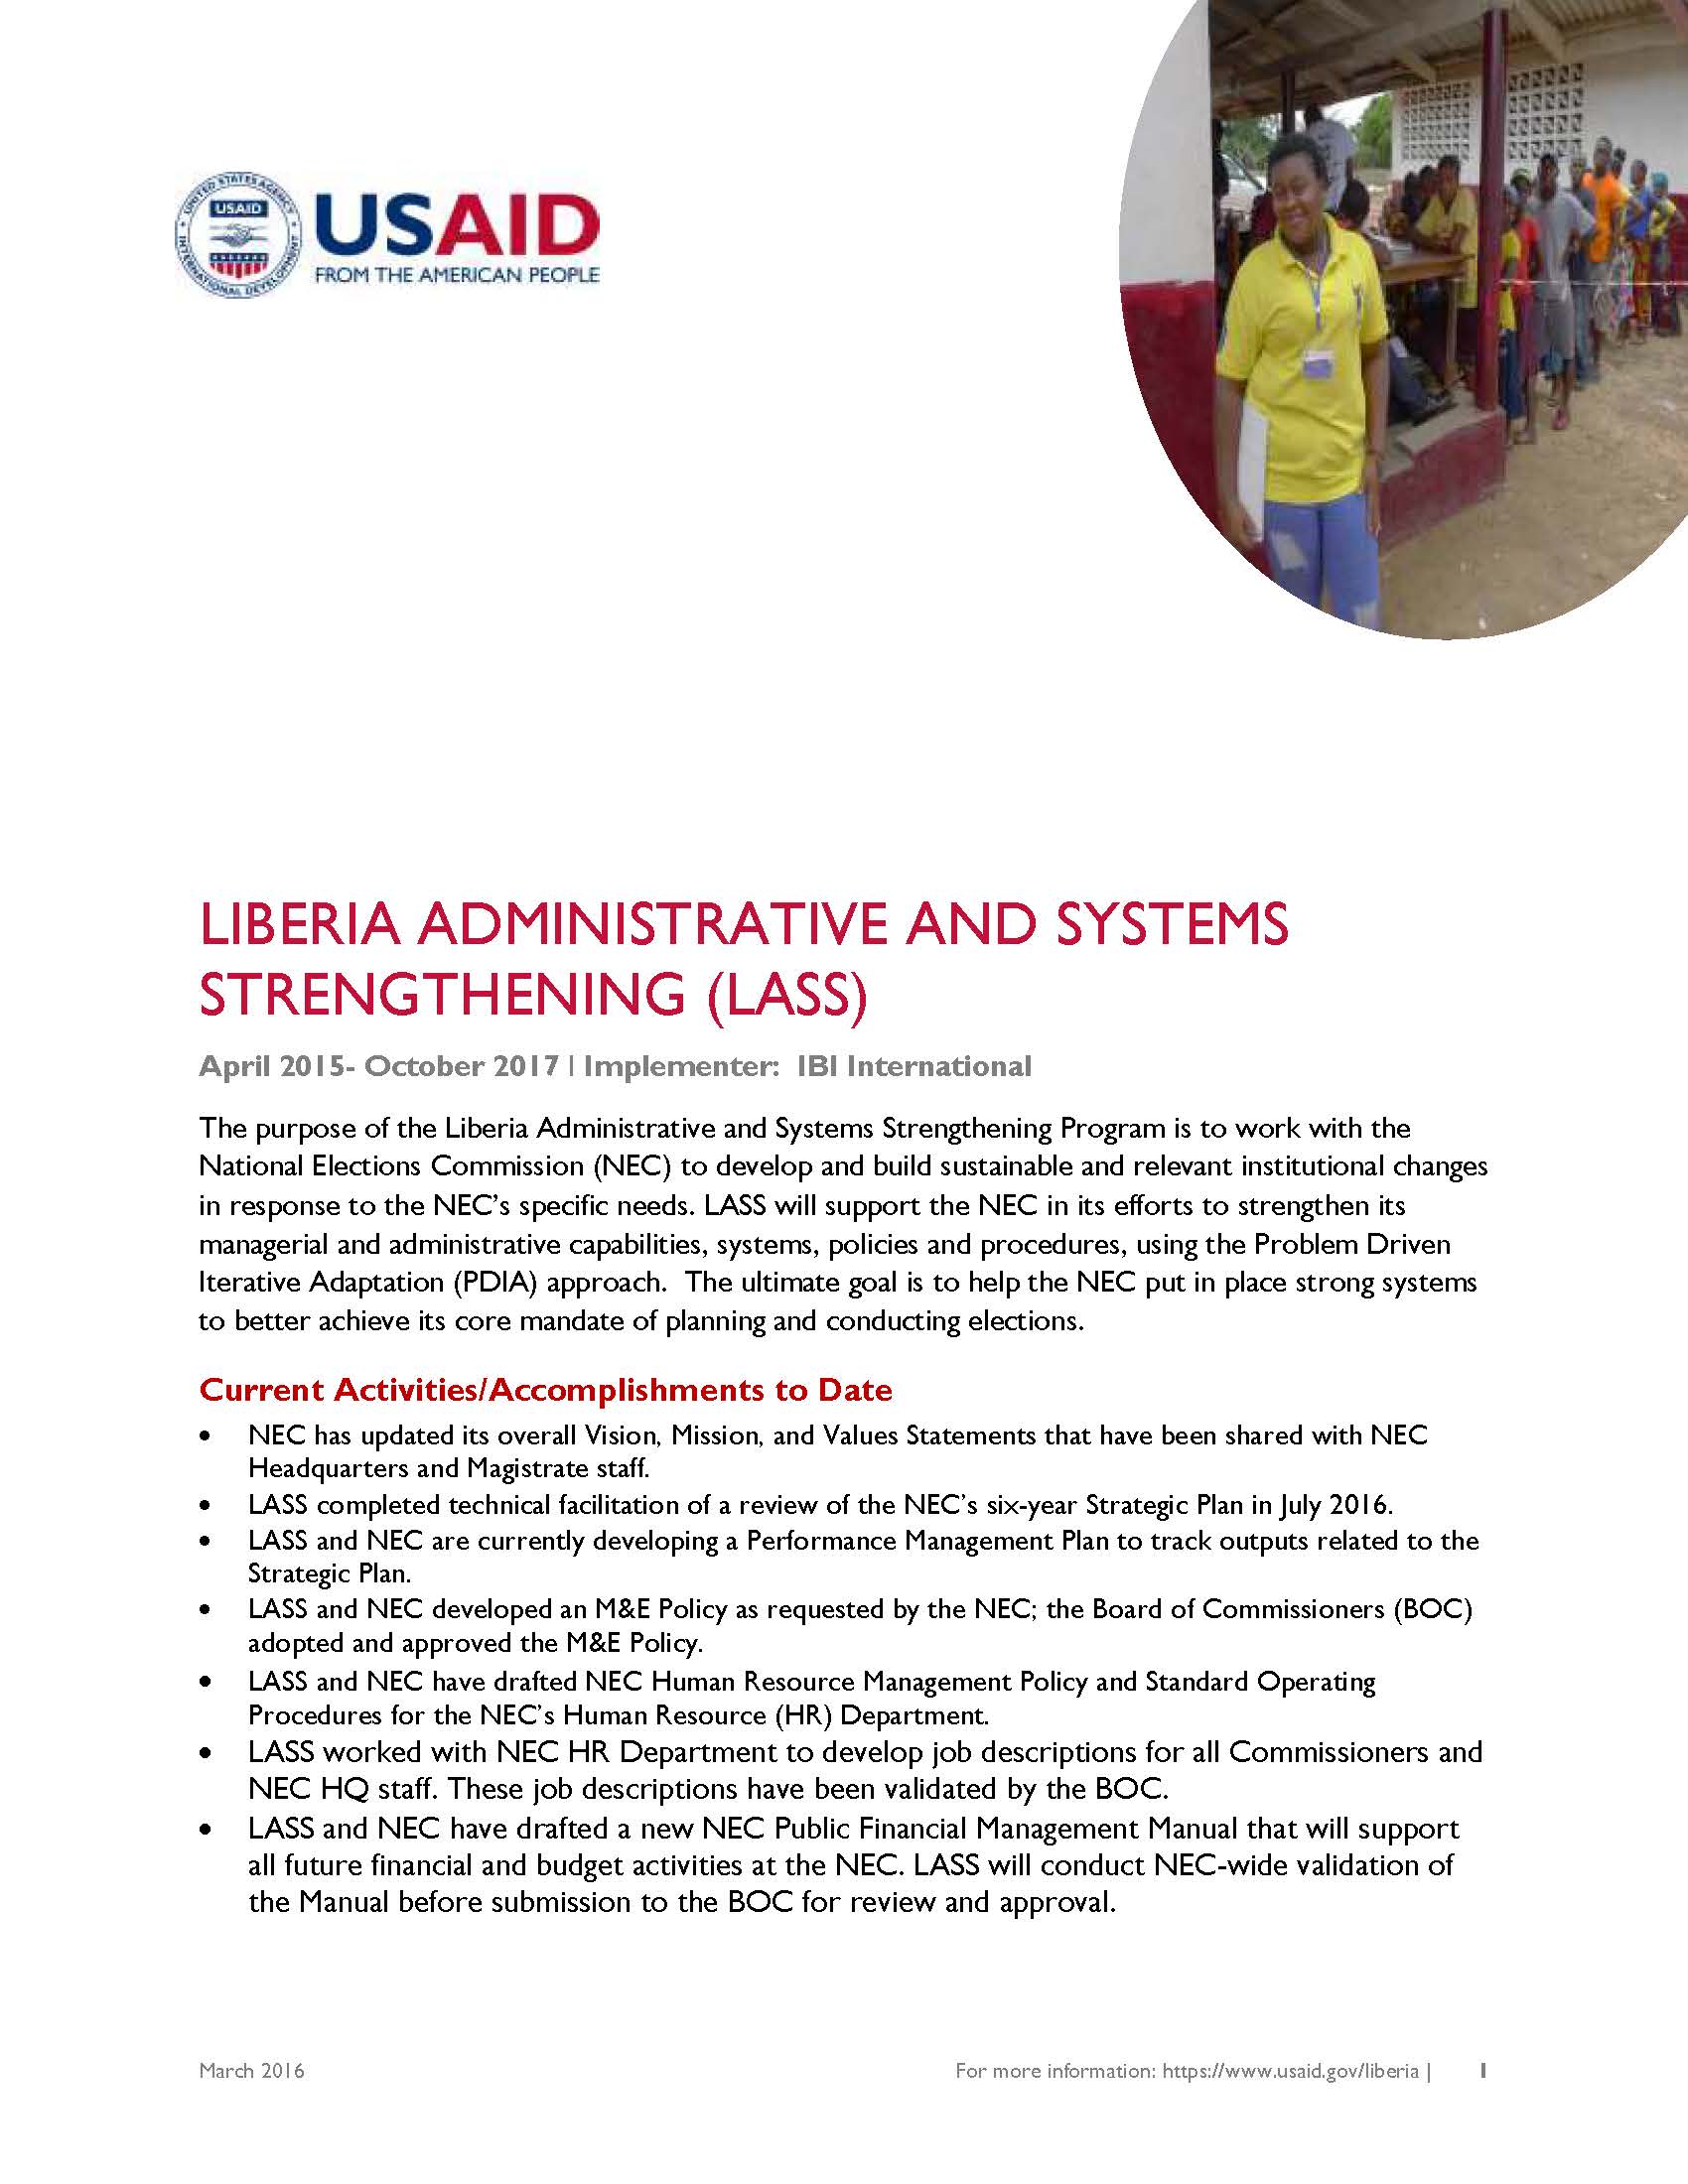 Liberia Administrative and Systems Strengthening Fact Sheet